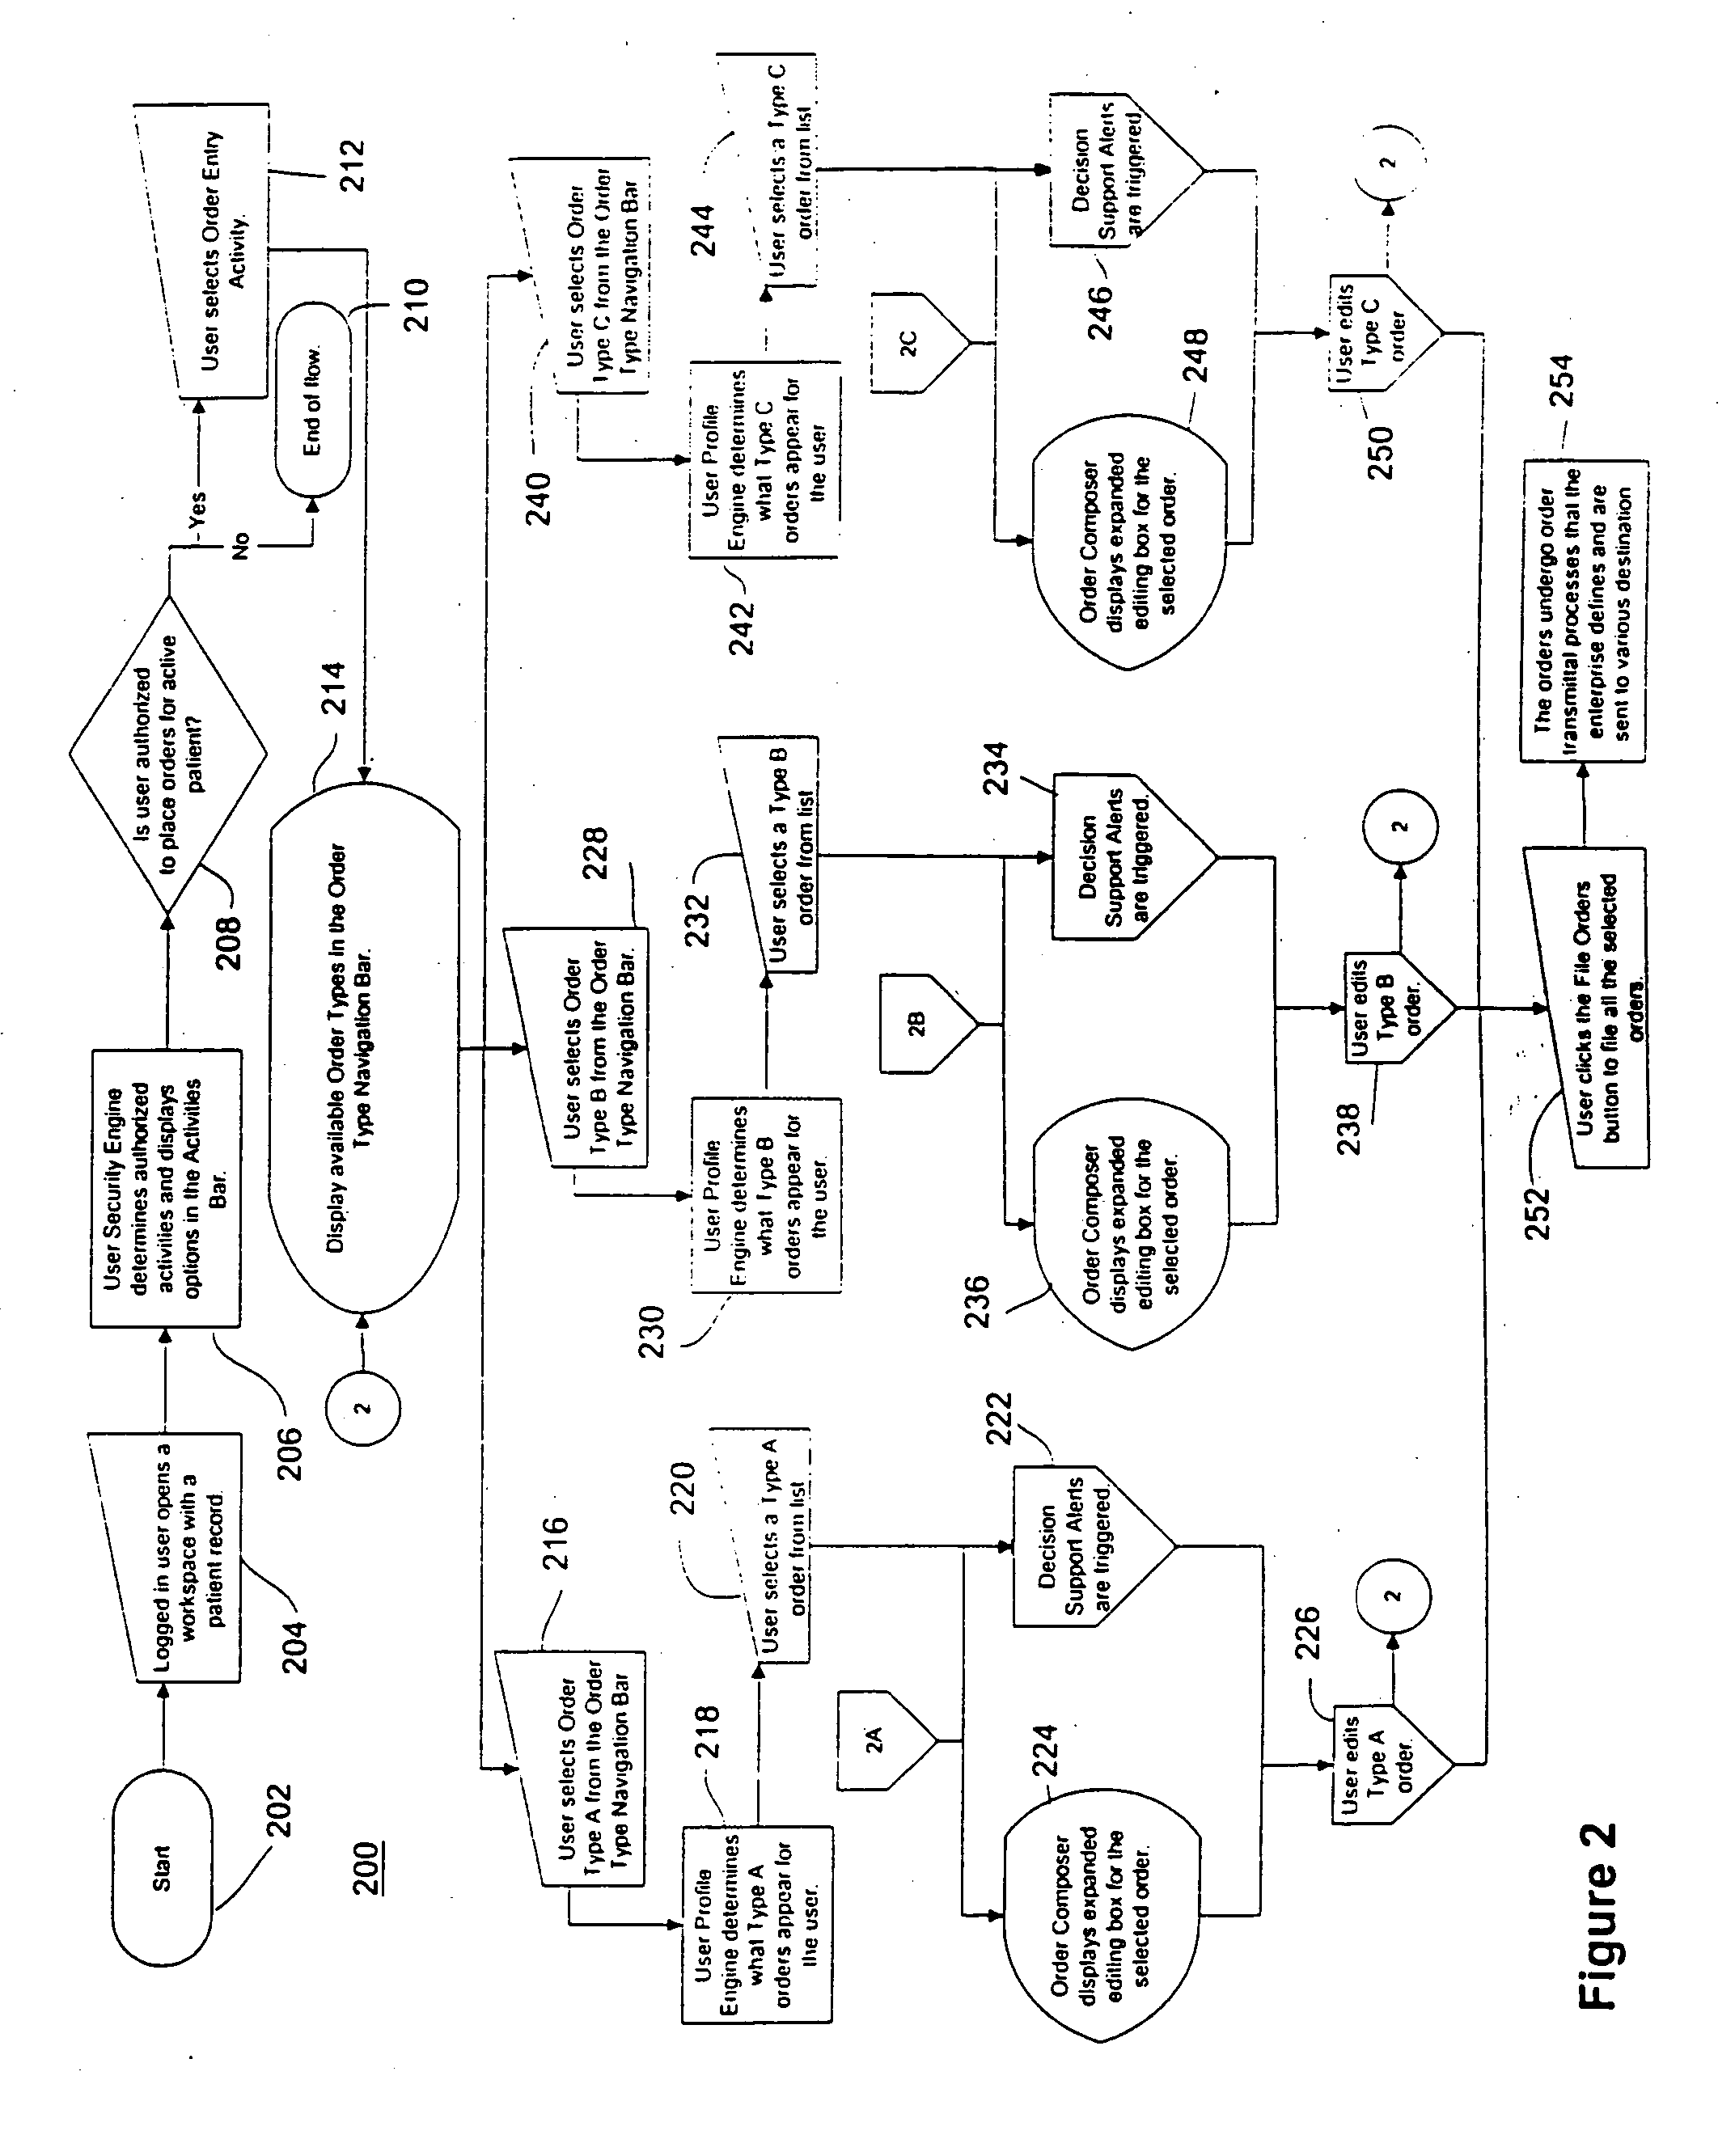 Electronic system for collecting and automatically populating clinical order information in an acute care setting